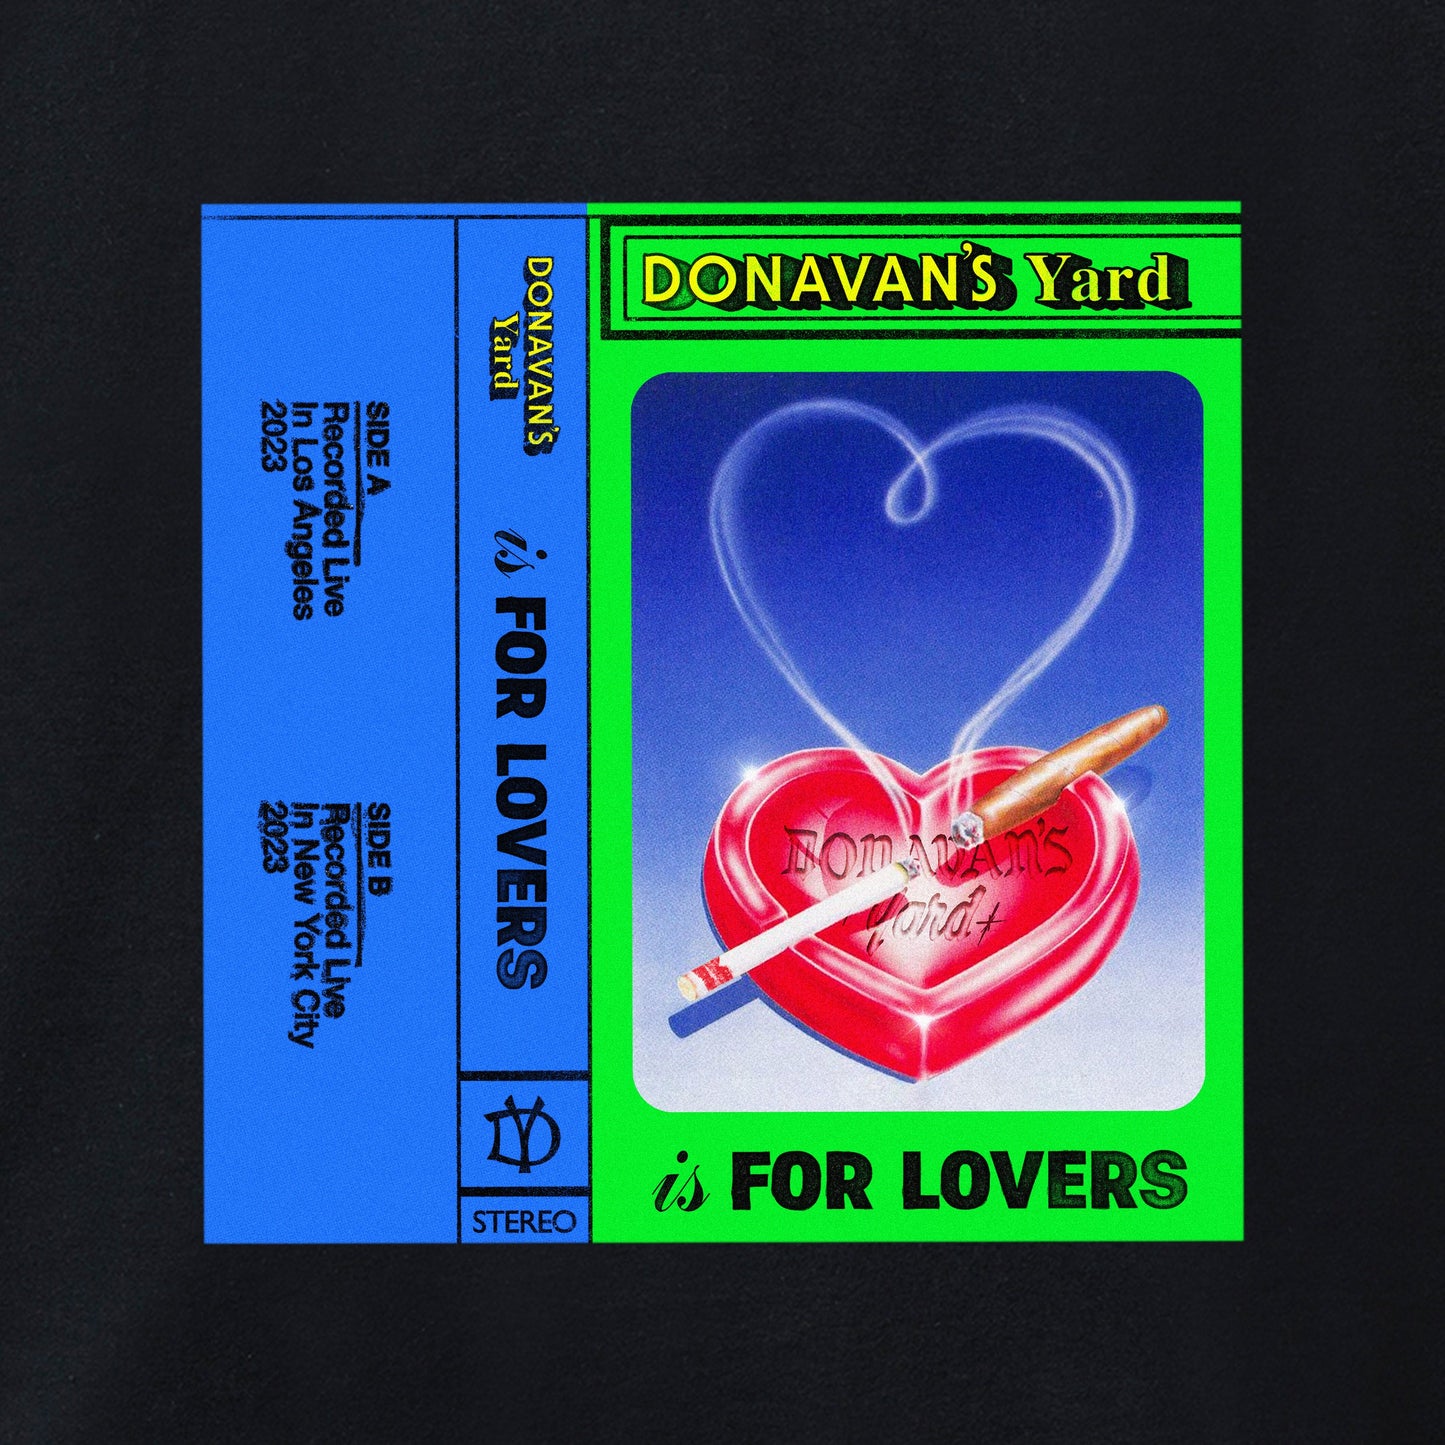 DY is for Lovers Vol. 2 Tee